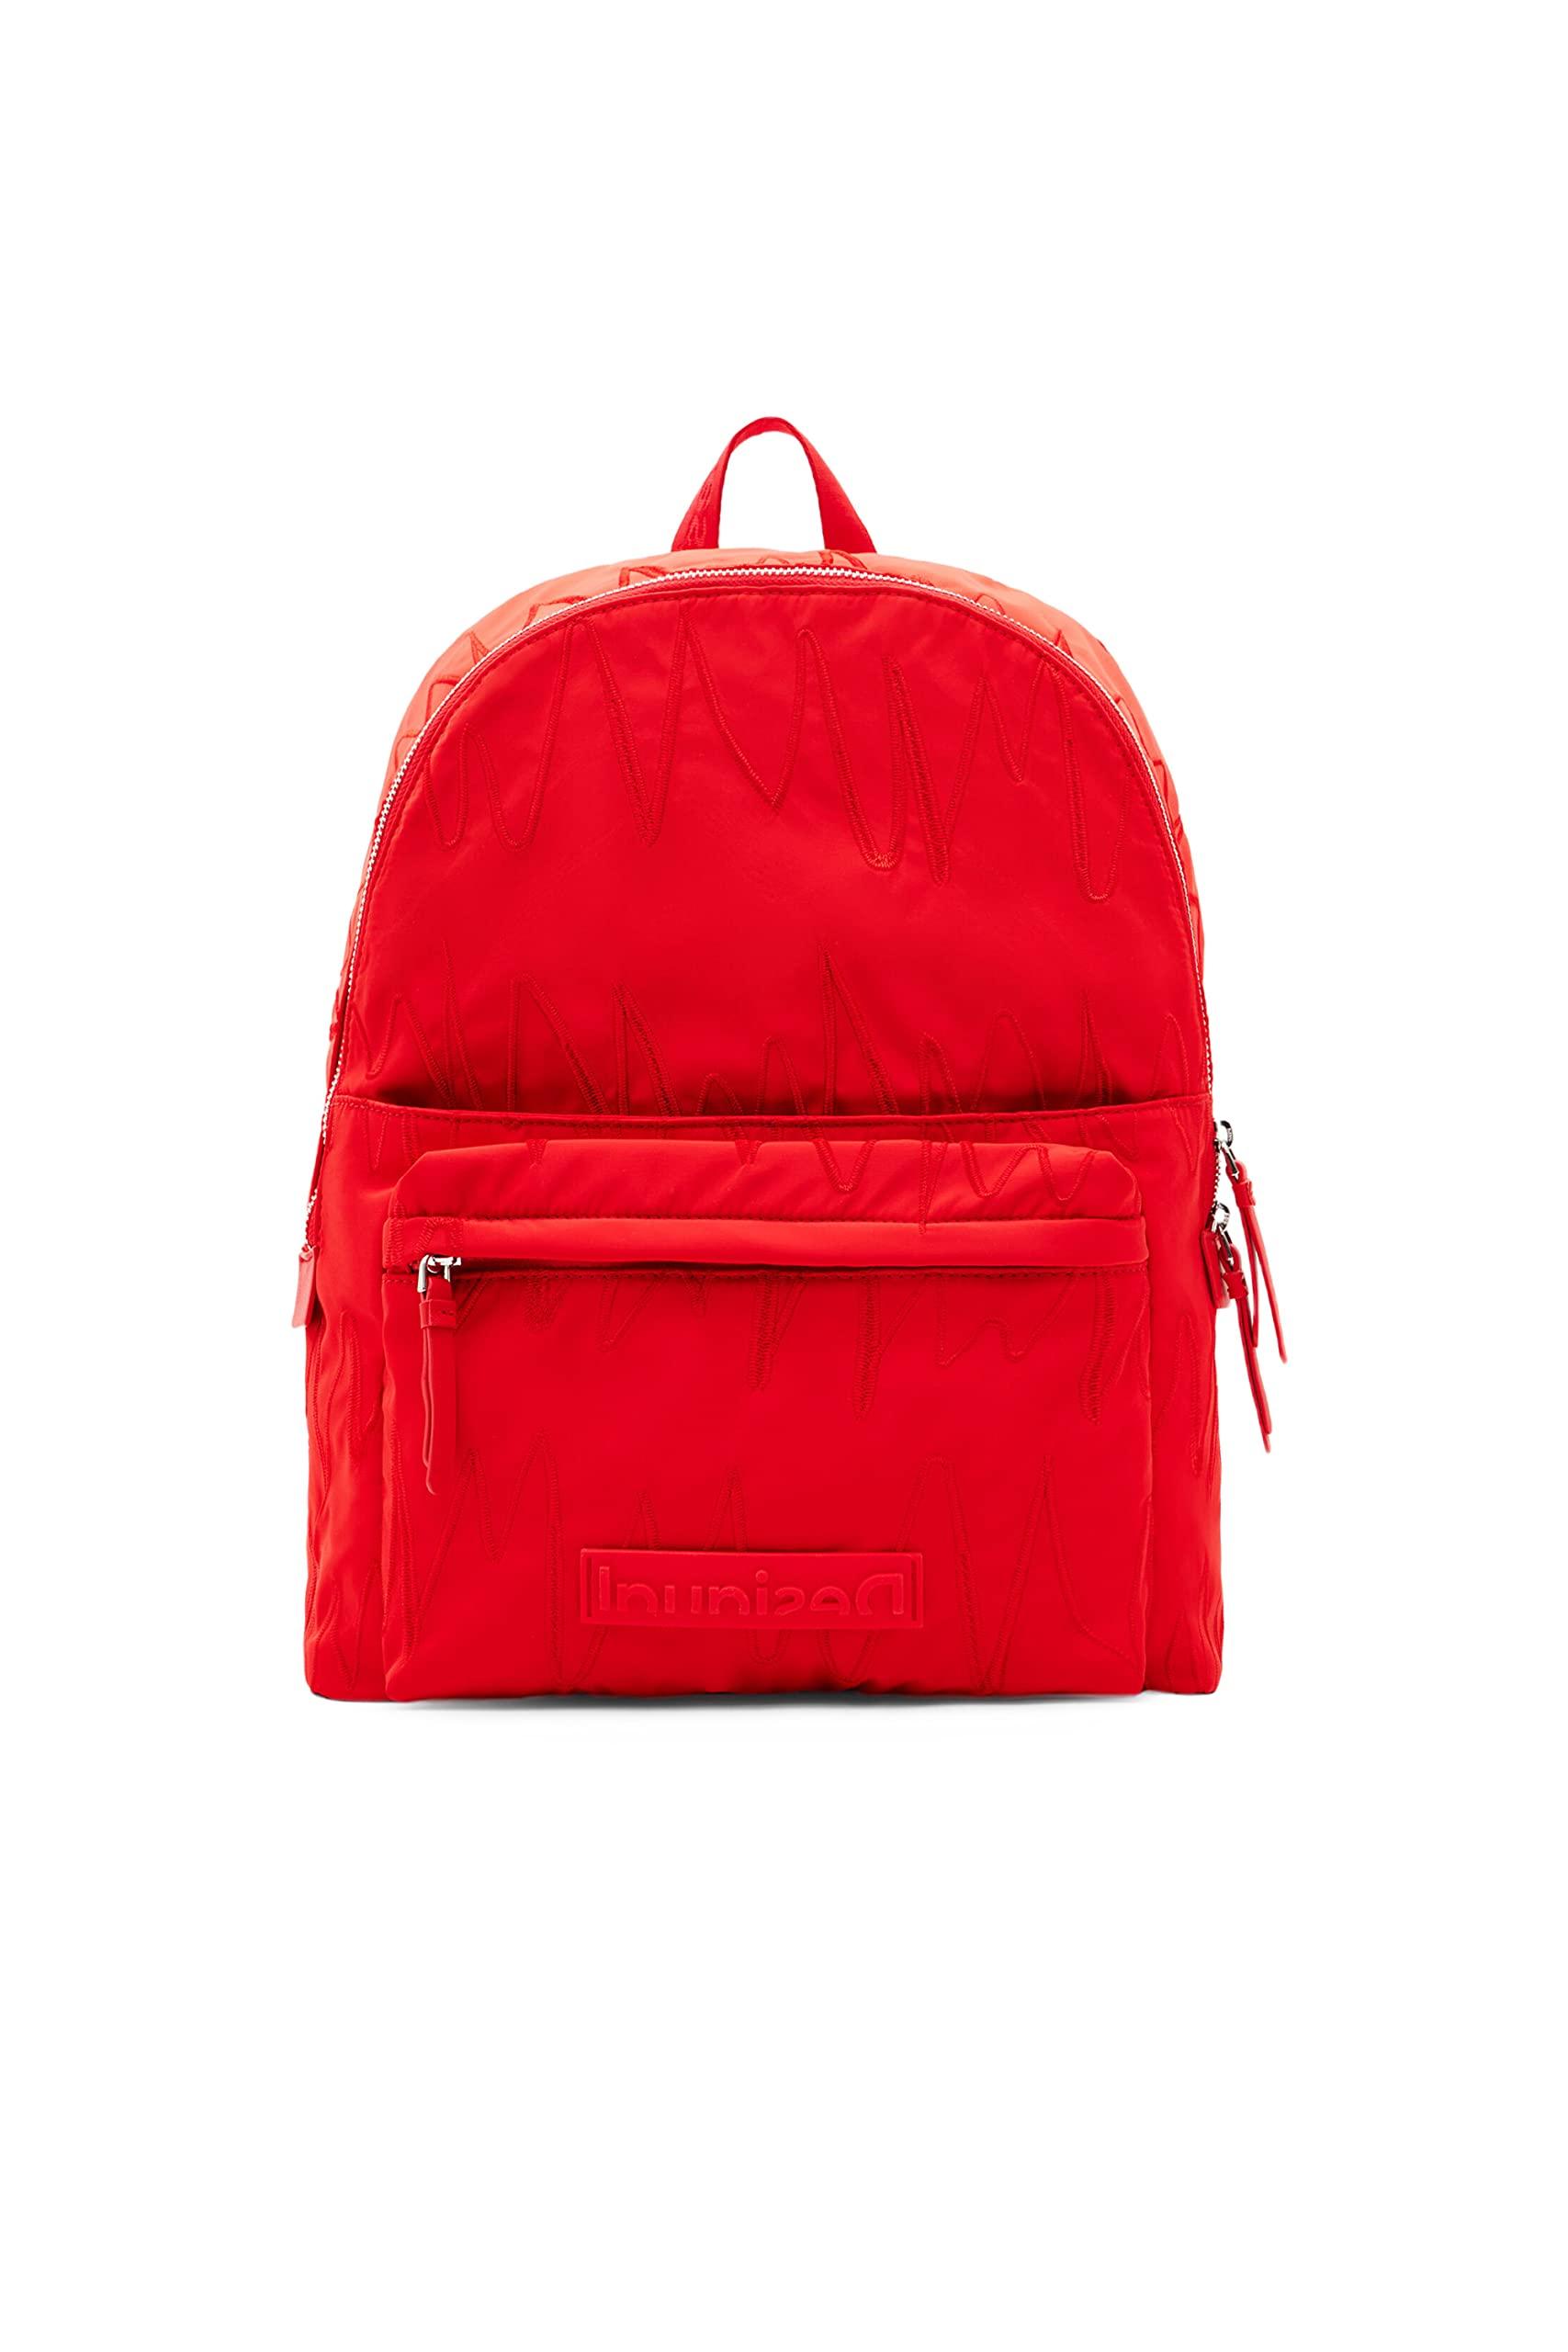 Desigual Accessories Nylon Backpack Medium in Red | Lyst